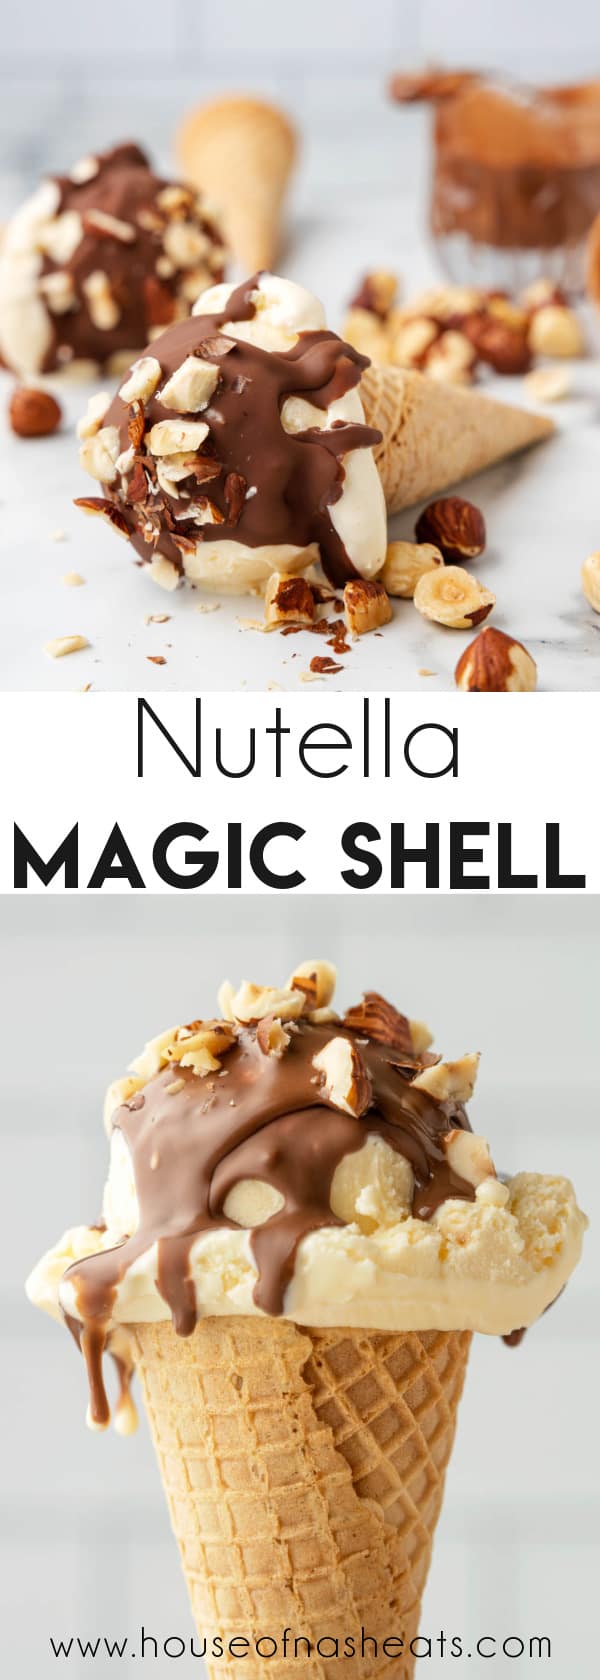 A collage of images of Nutella magic shell with text overlay.